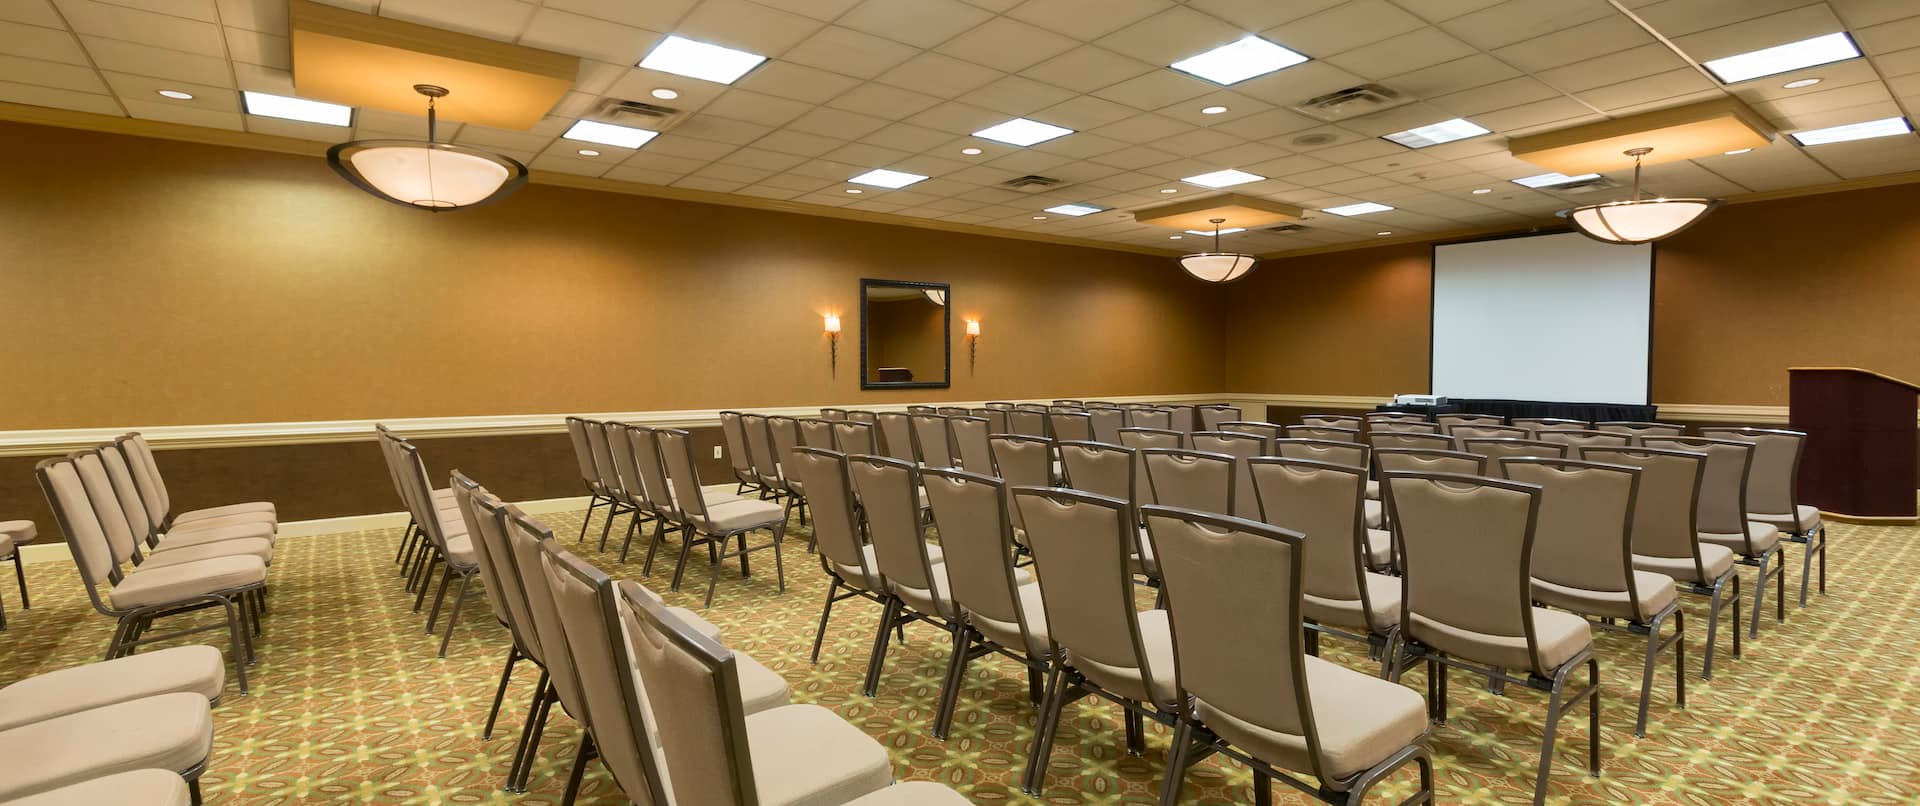 Meeting room with theater setup chairs facing projector screen